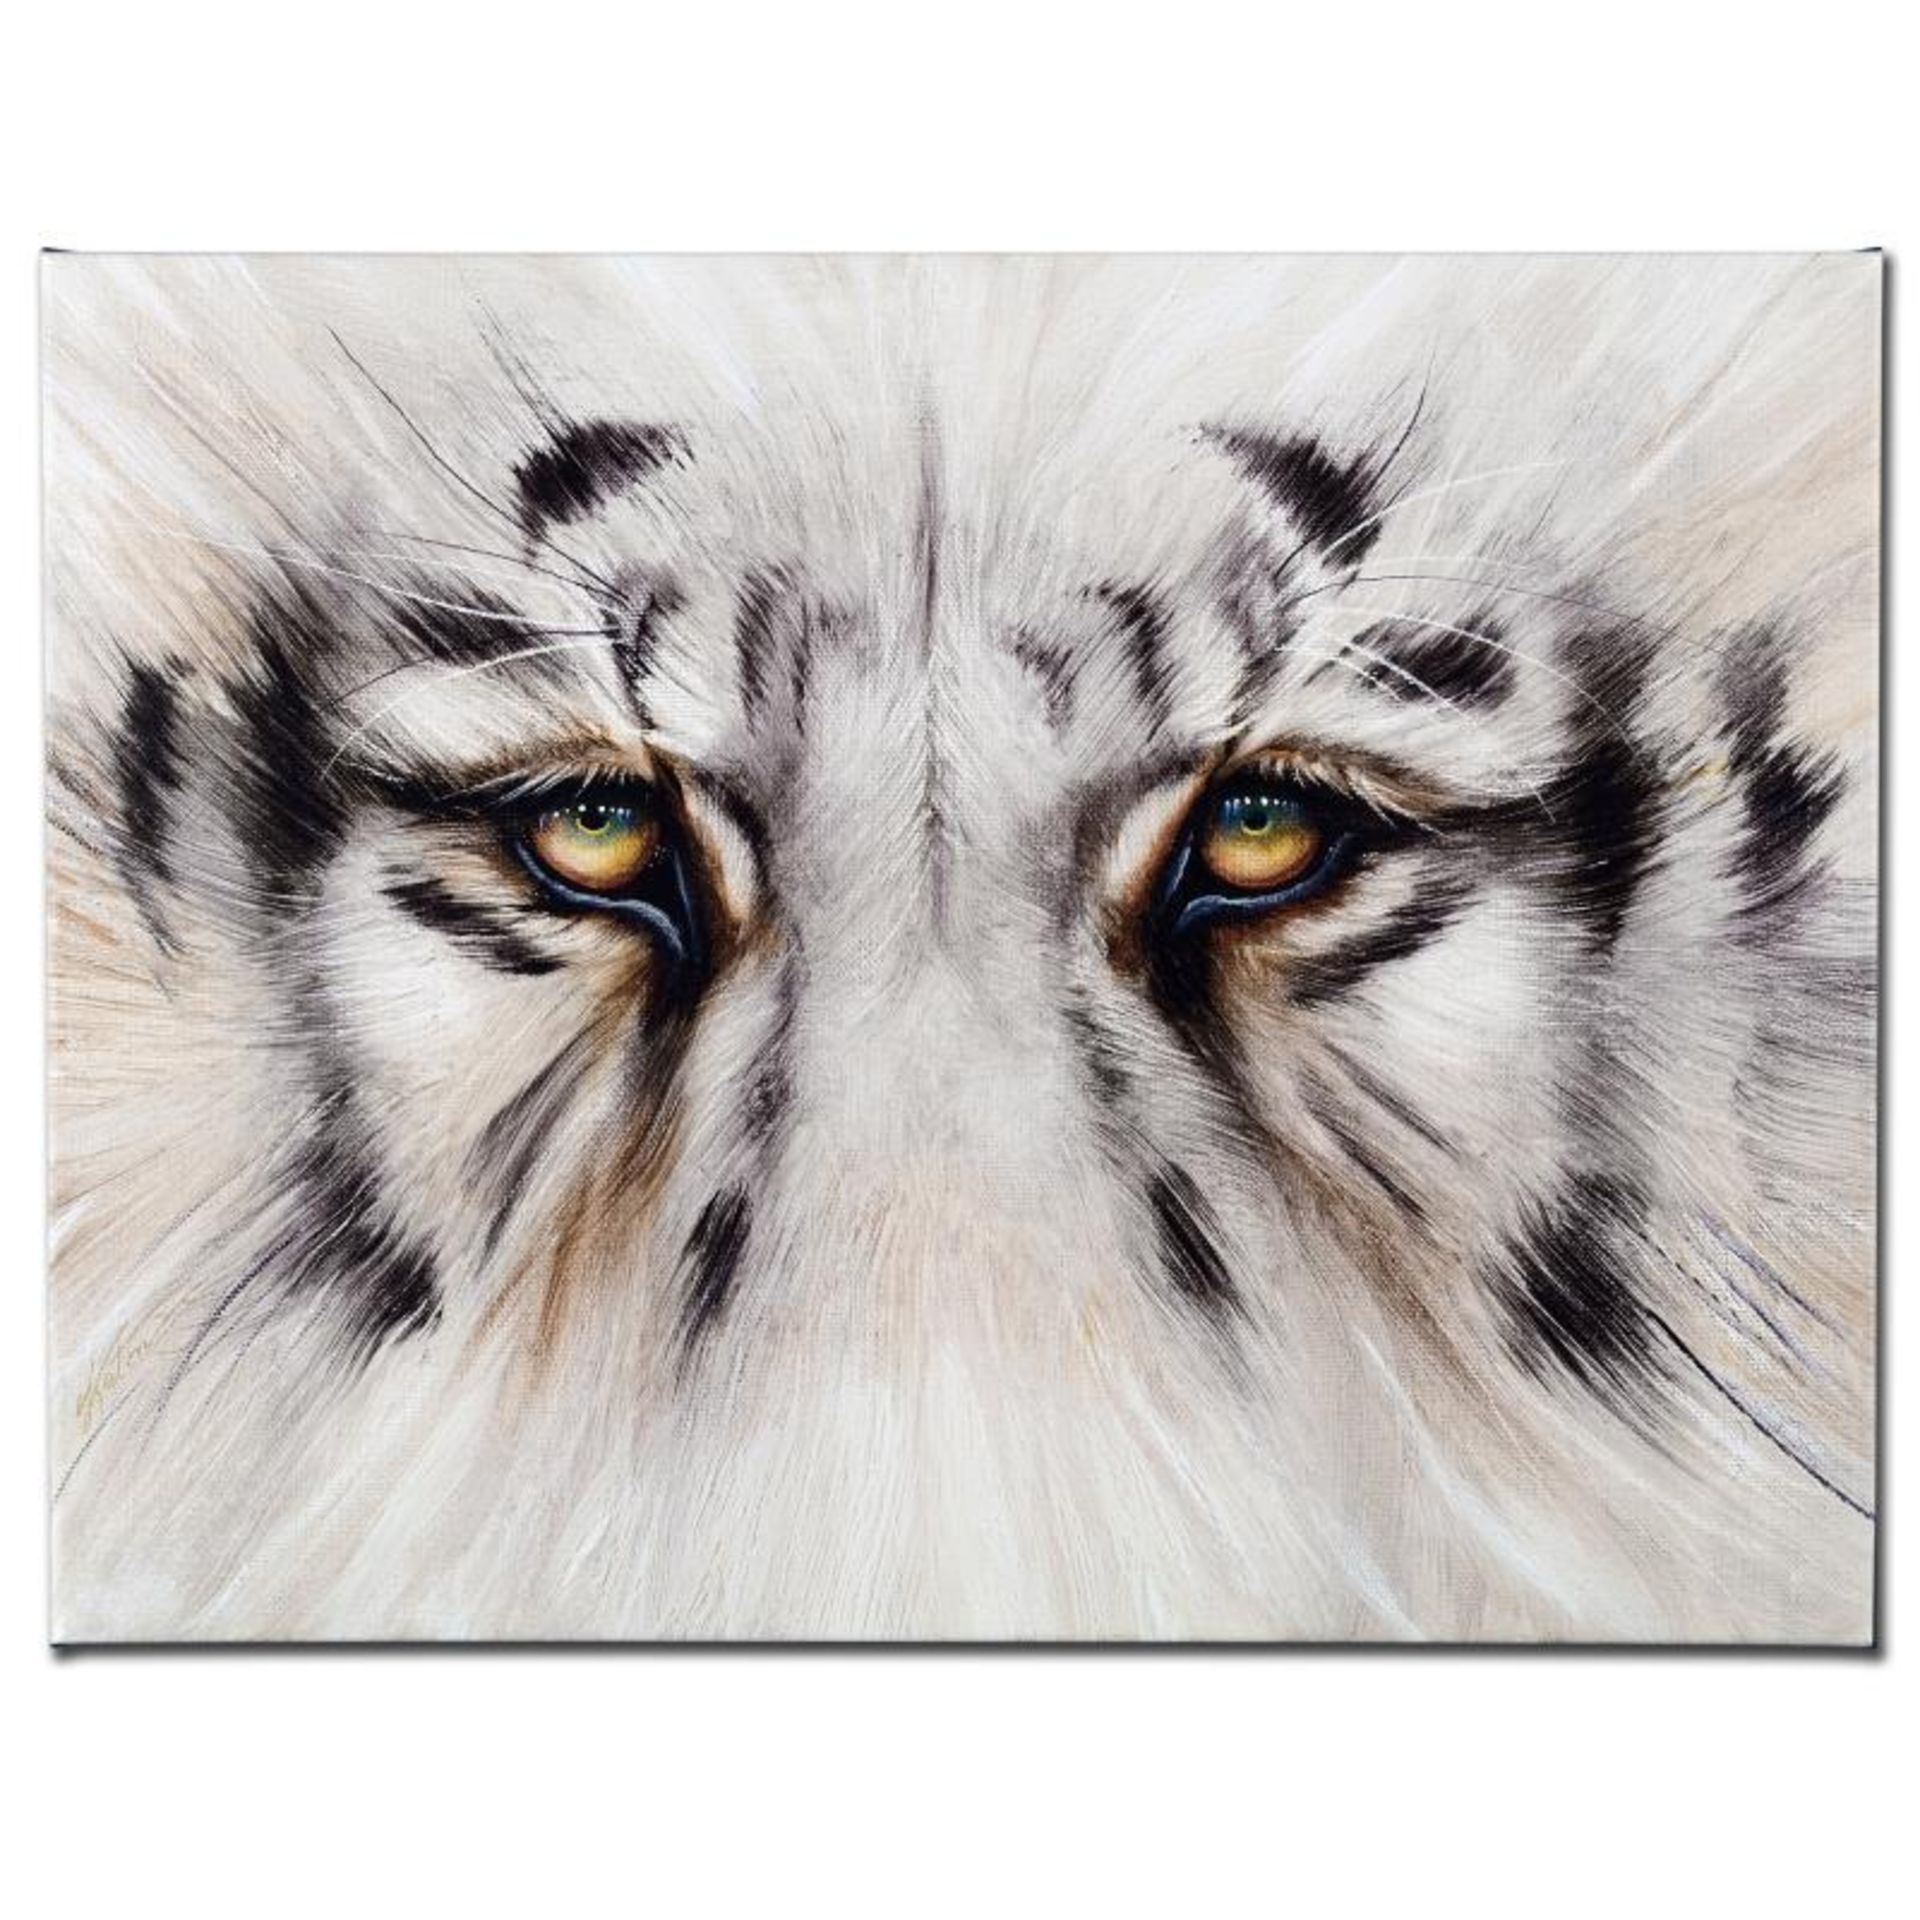 "Eye See You" Limited Edition Giclee on Canvas by Martin Katon, Numbered and Han